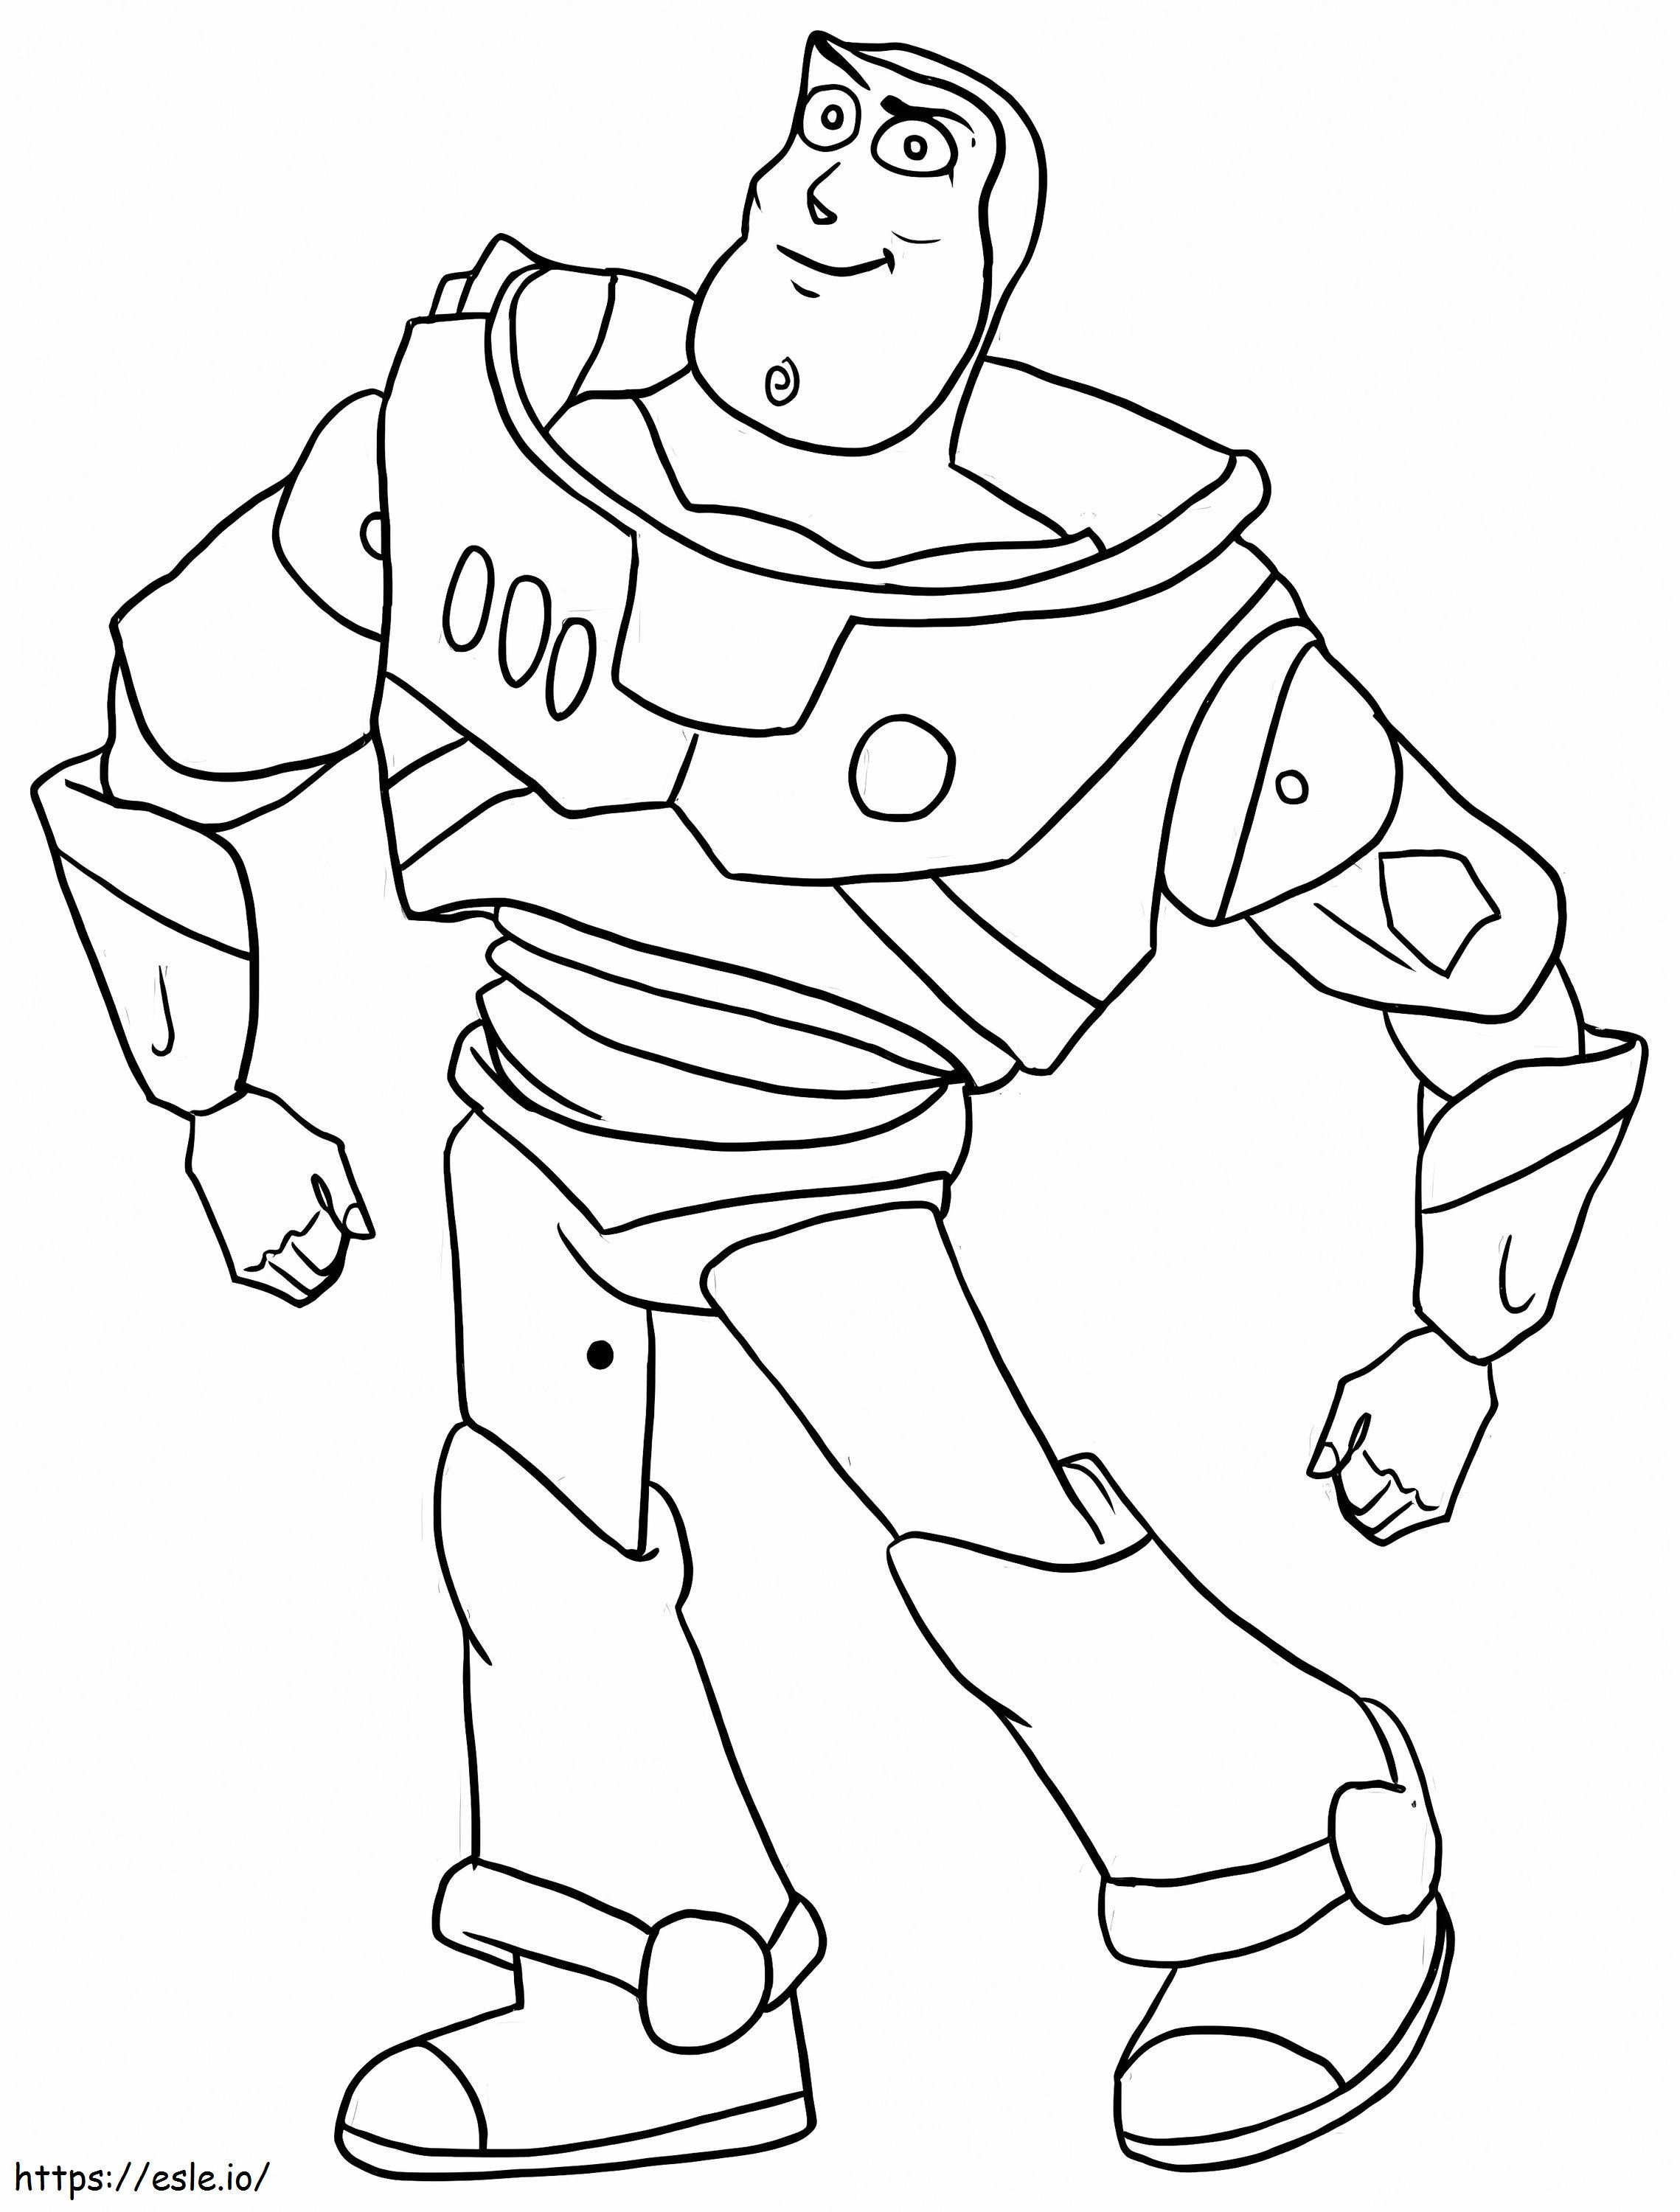 Basic Drawing Buzz Lightyear coloring page